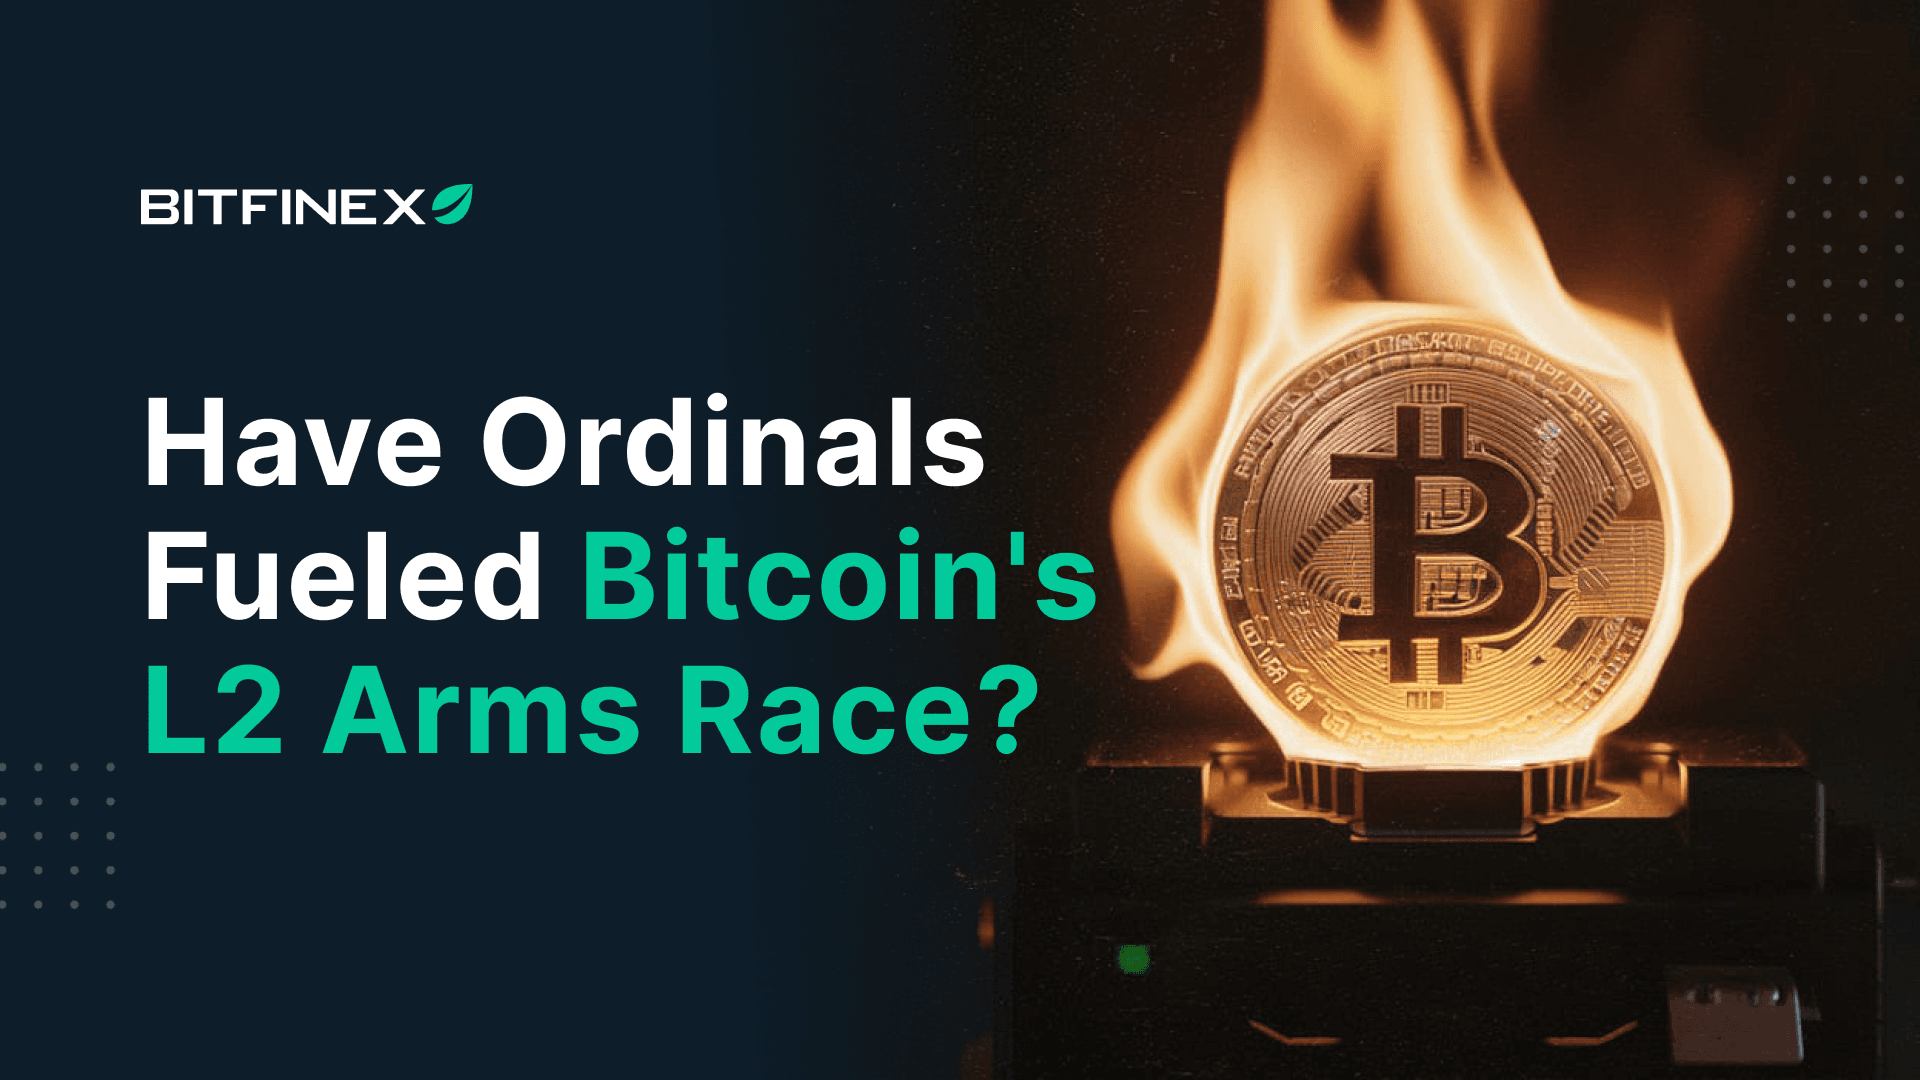 Have Ordinals Fueled Bitcoin’s L2 Arms Race?